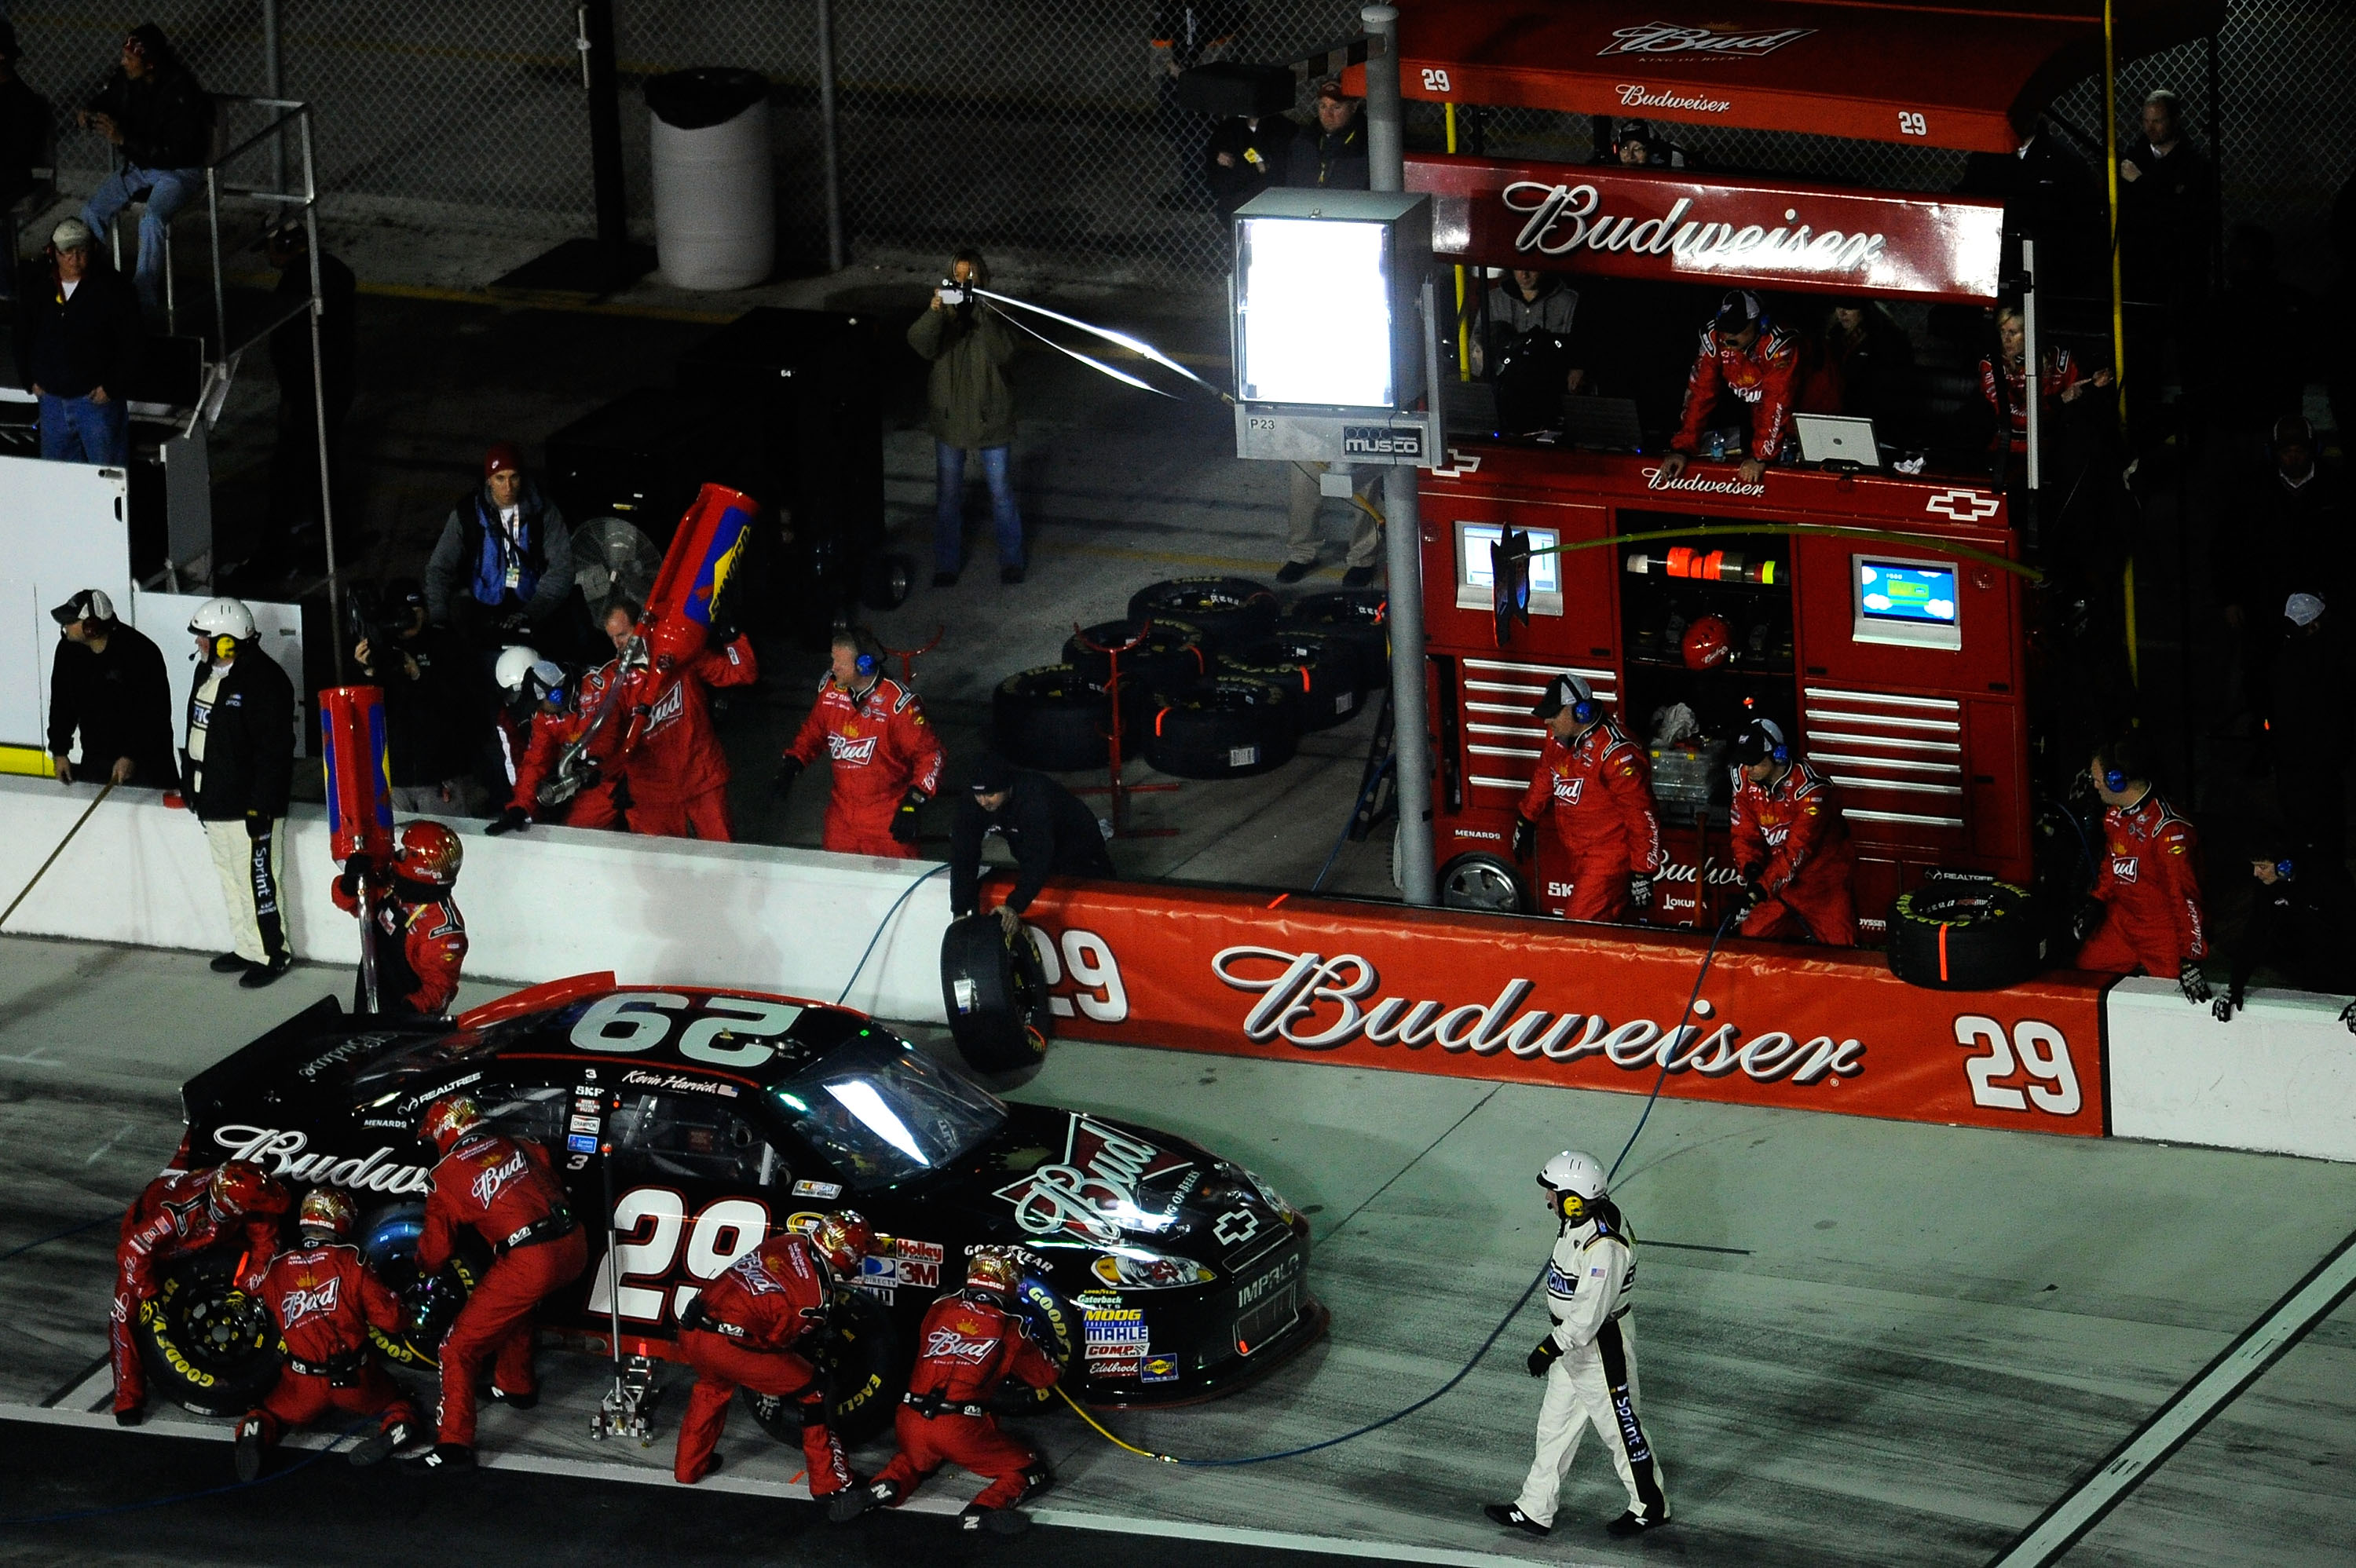 Many teams paid close attention to how long the new fueling can would take.